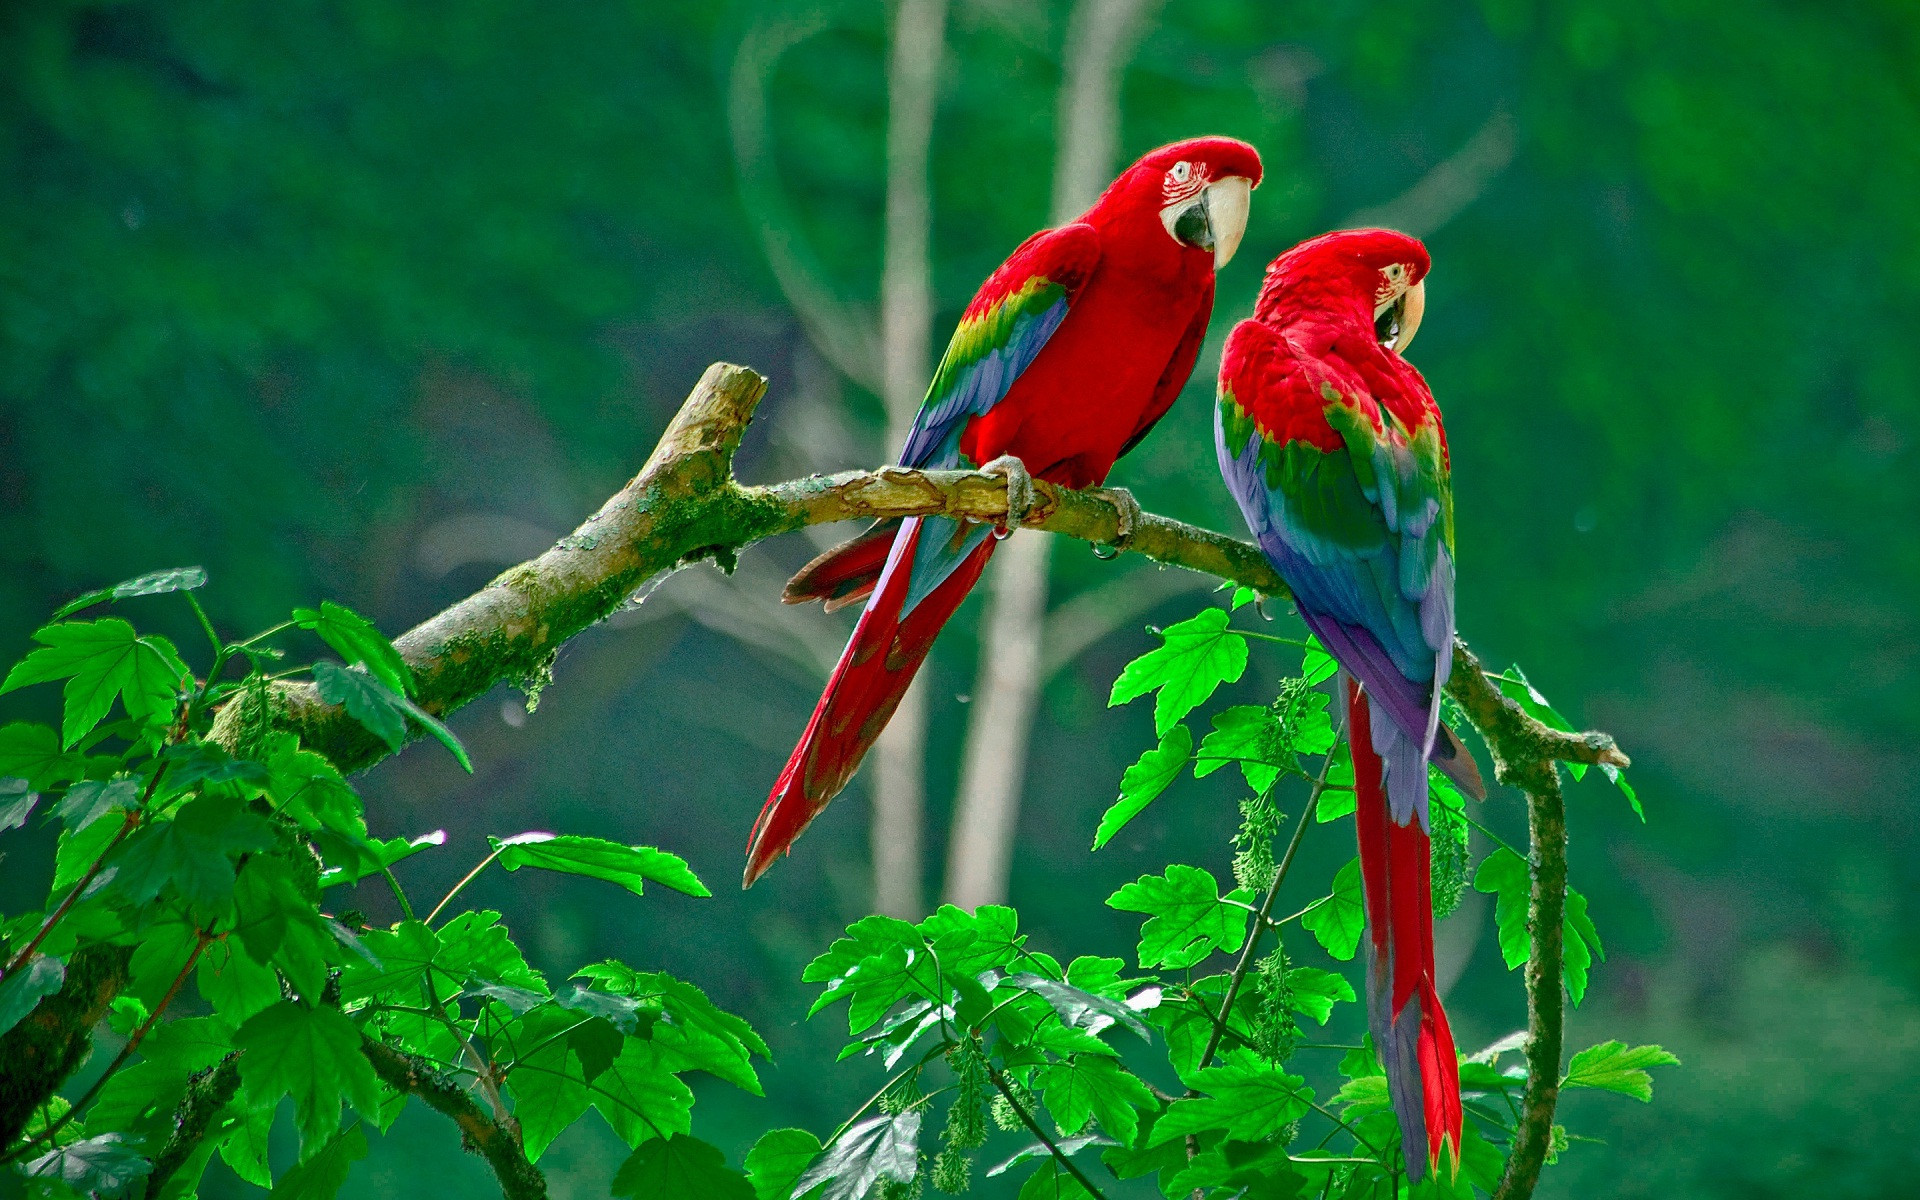 1920x1200 Love Bird HD Wallpapers For Pc with ID 11824 on Animals category in Amazing  Wallpaperz. Love Bird HD Wallpapers For Pc is one from many Best HD  Wallpapers ...